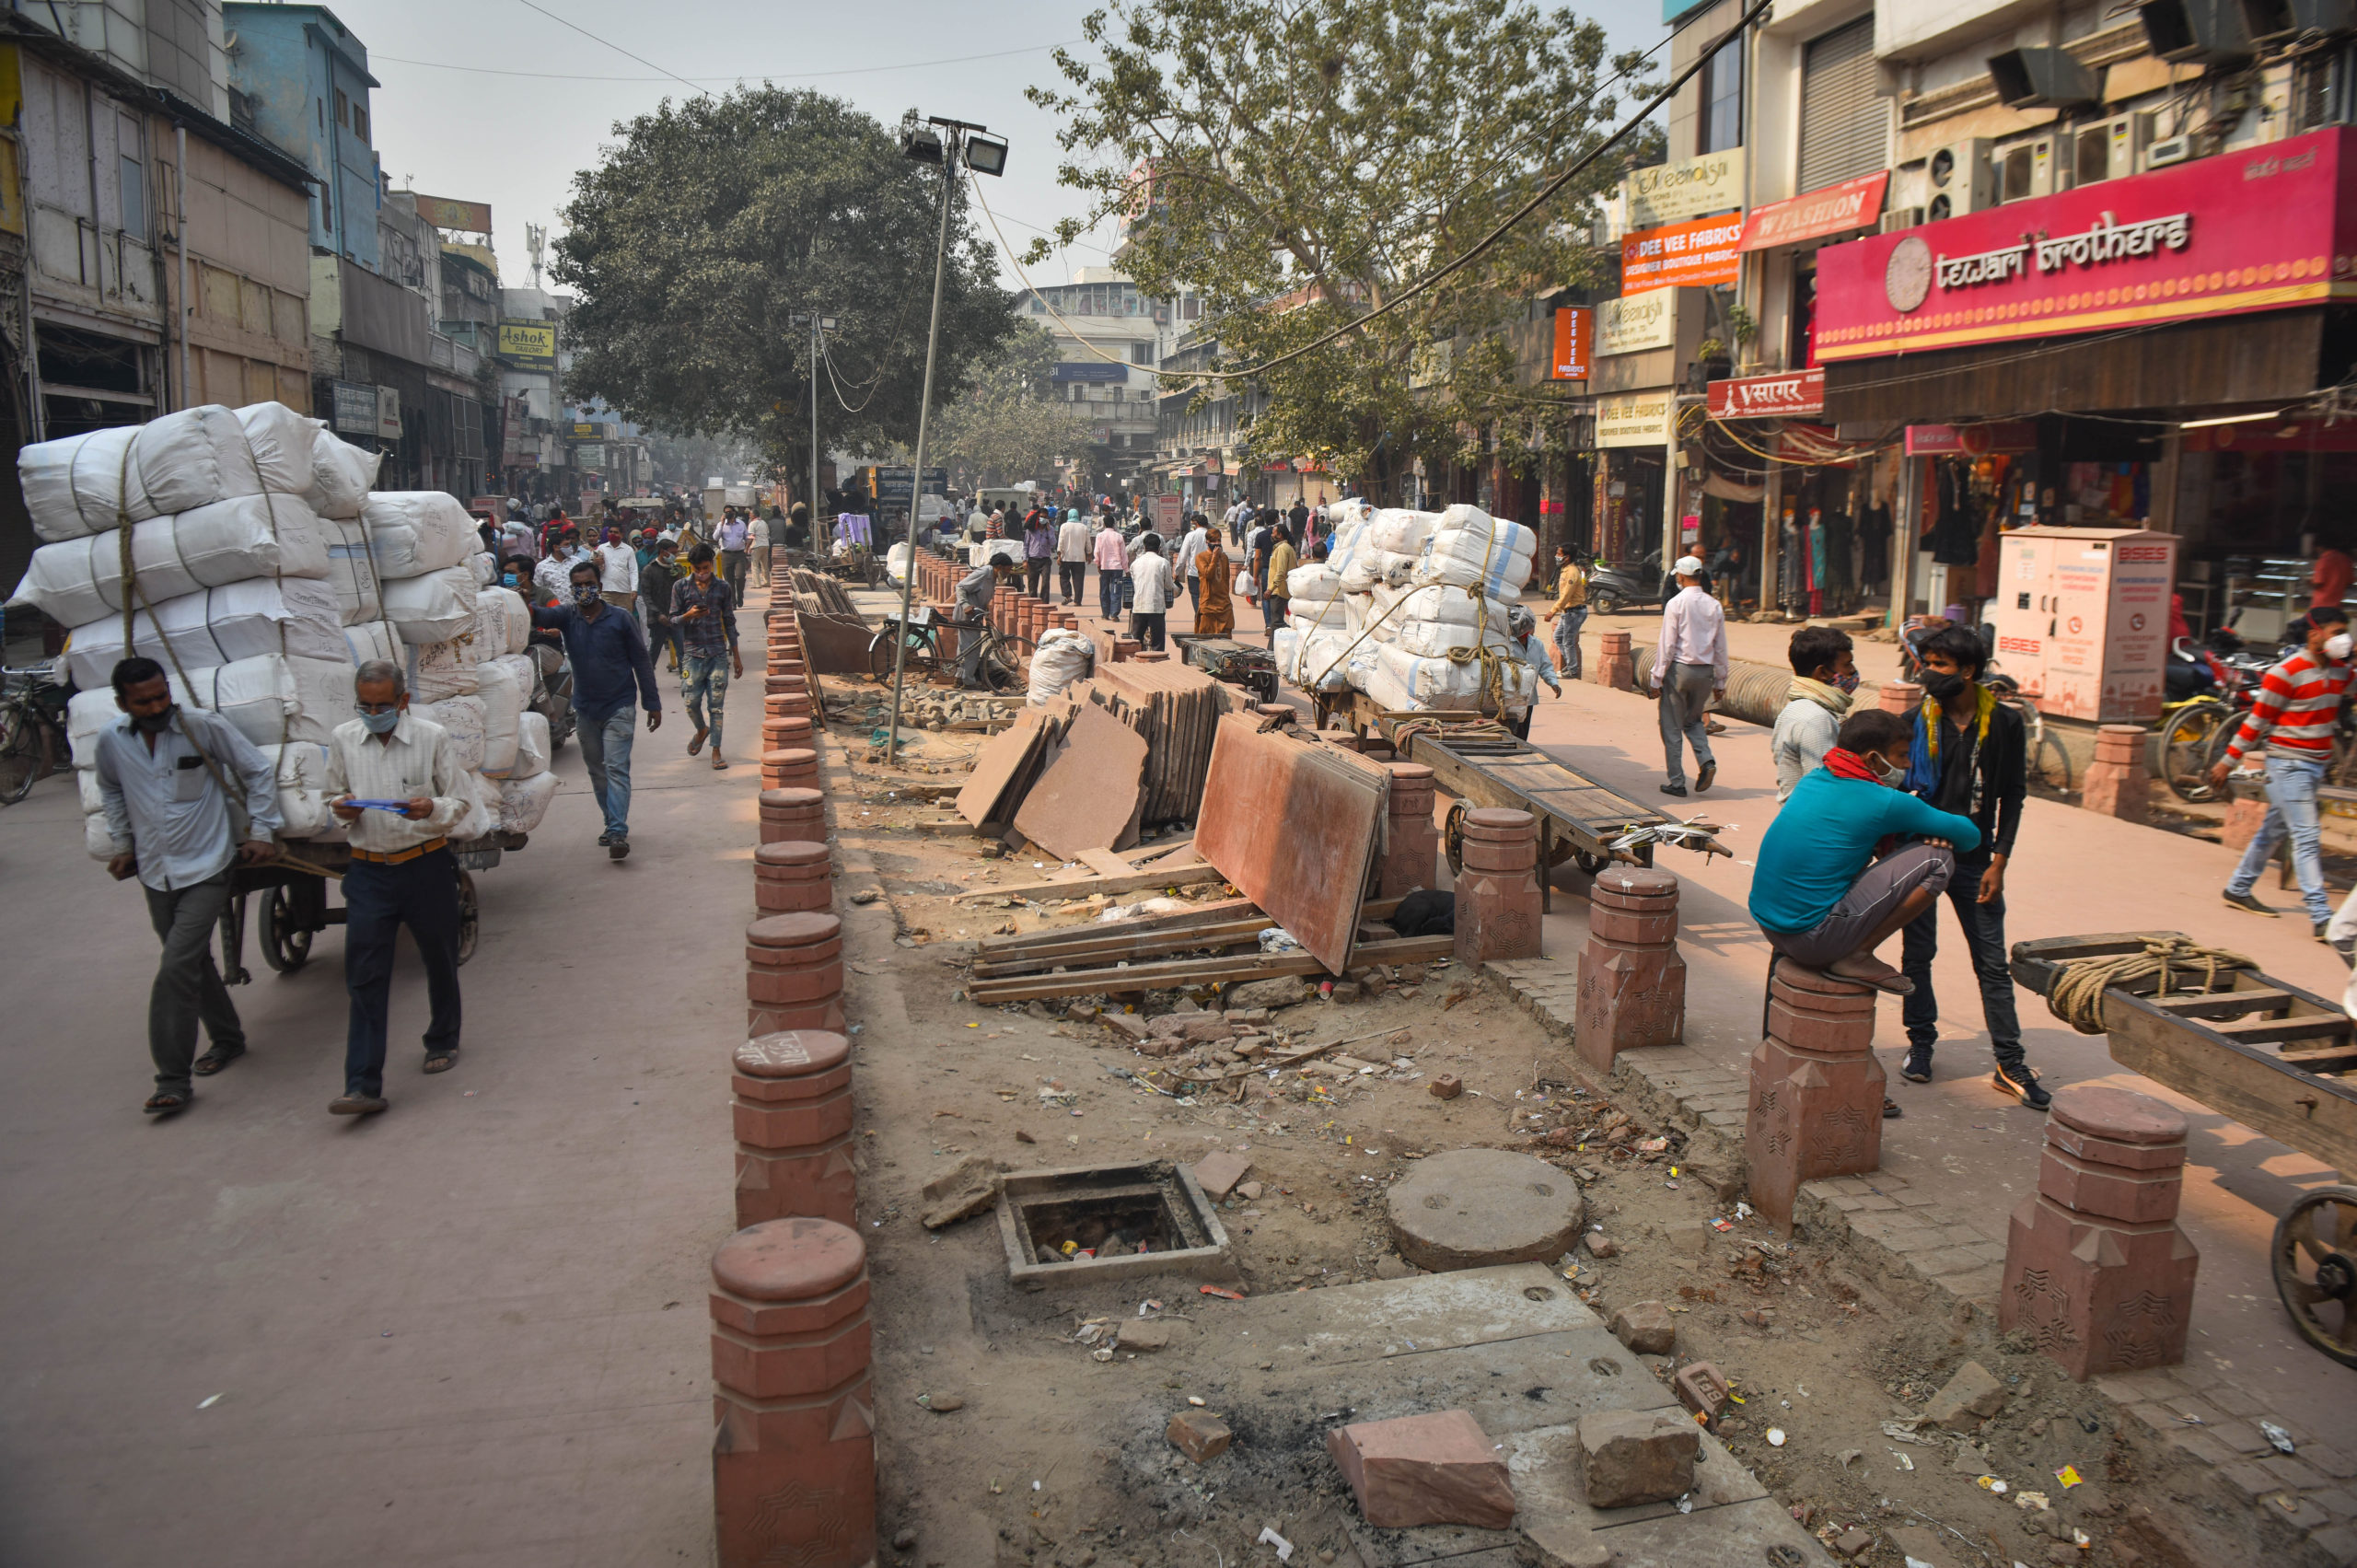 Chandni Chowk pedestrianisation project will be complete by Dec 31: AAP govt to HC